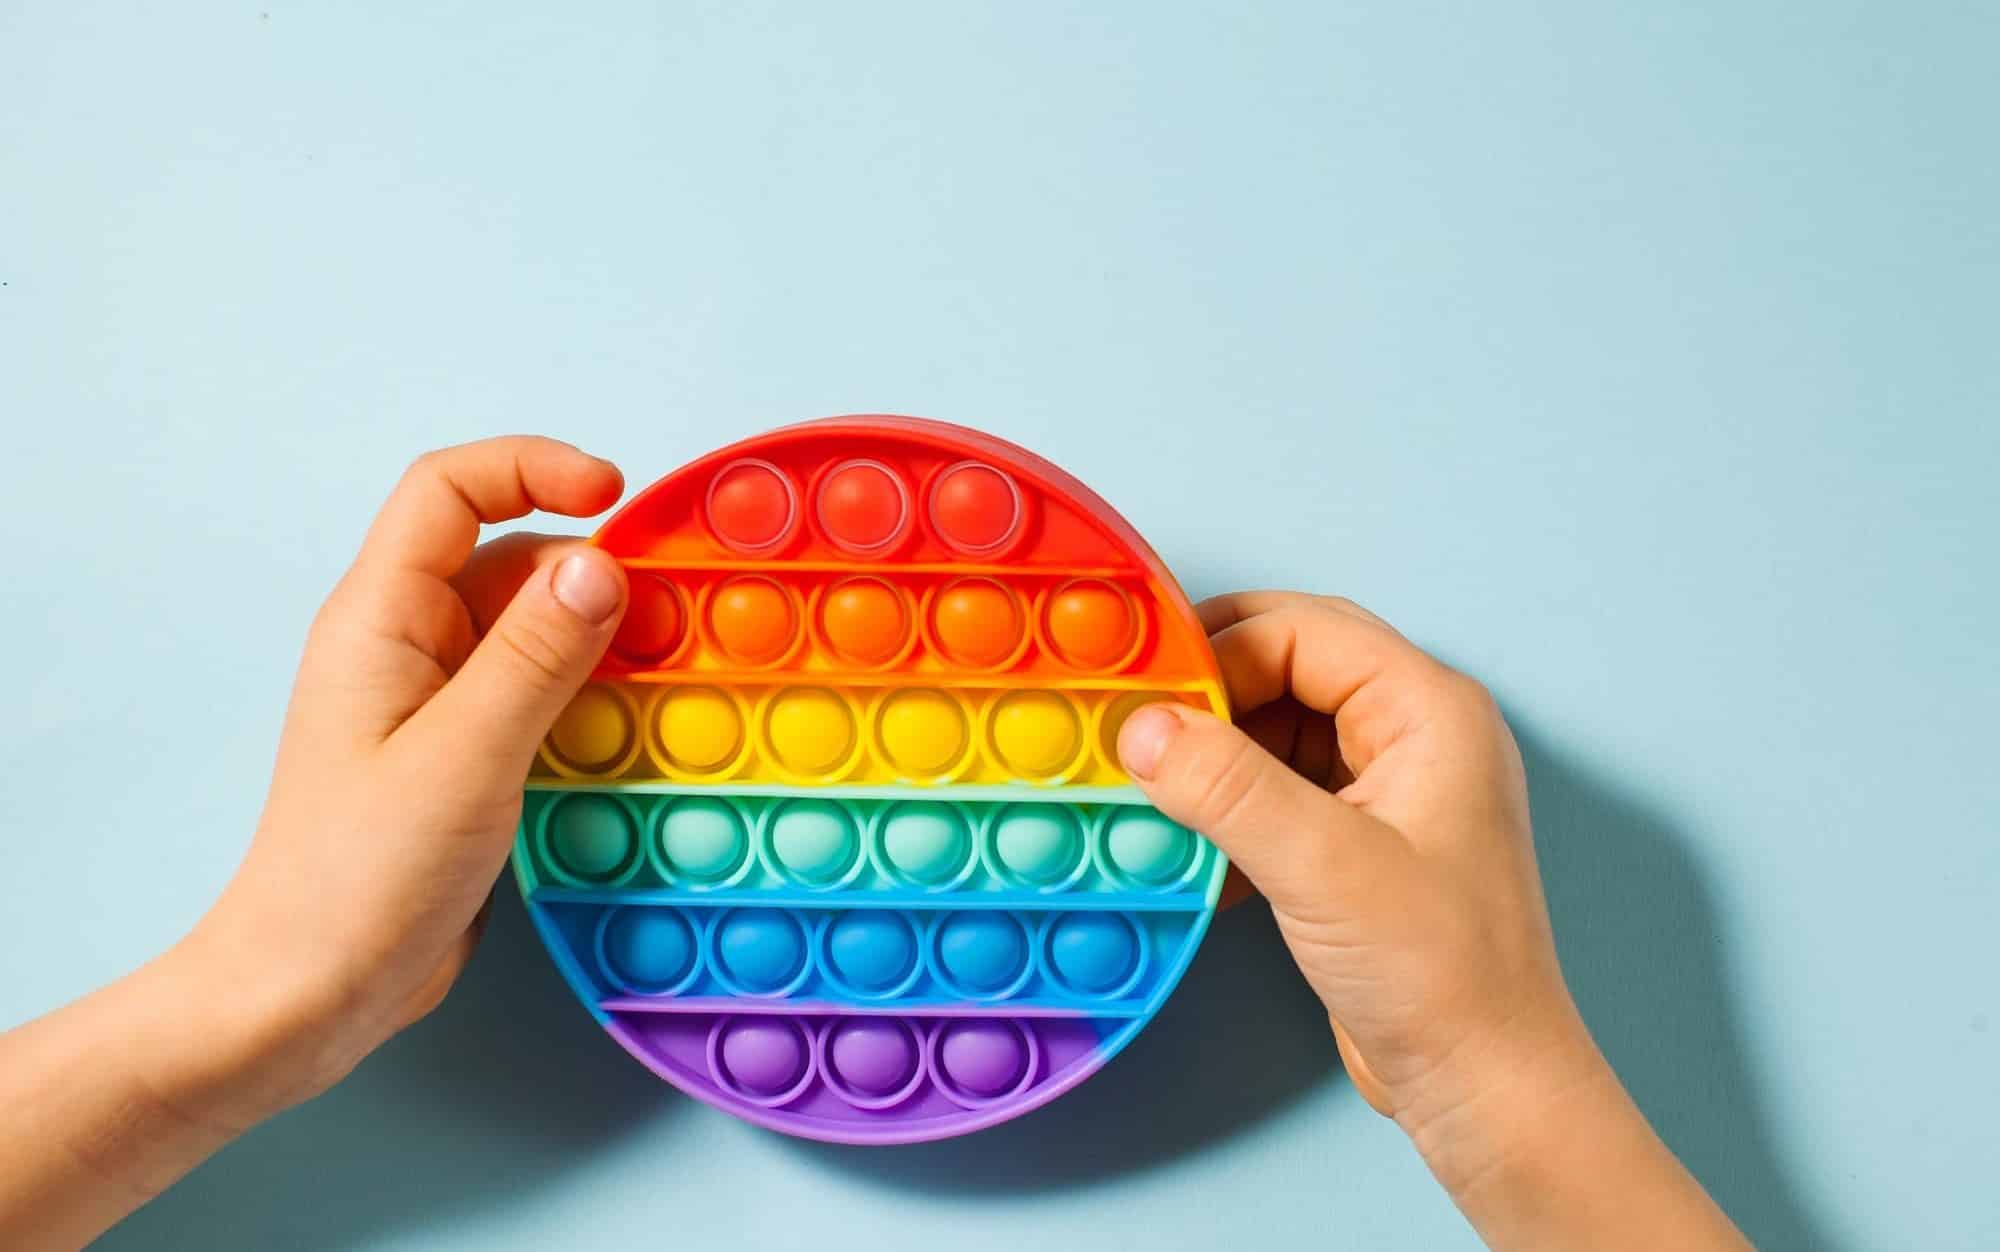 Pop it toy silicone. Anti-stress toy, a trend in children's toys.